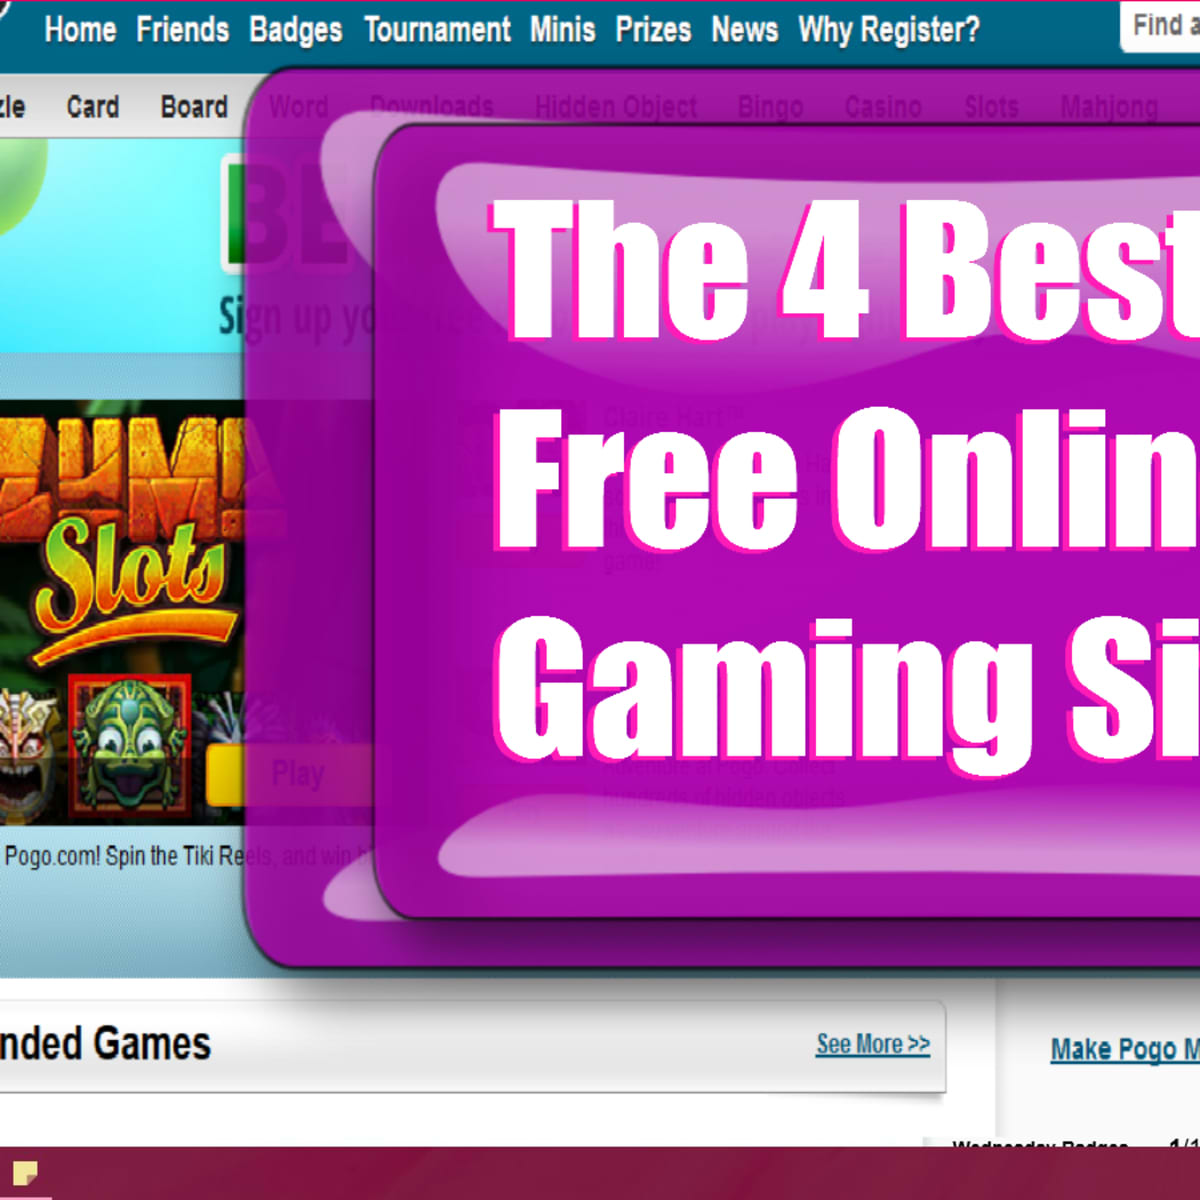 Other Online Game Sites